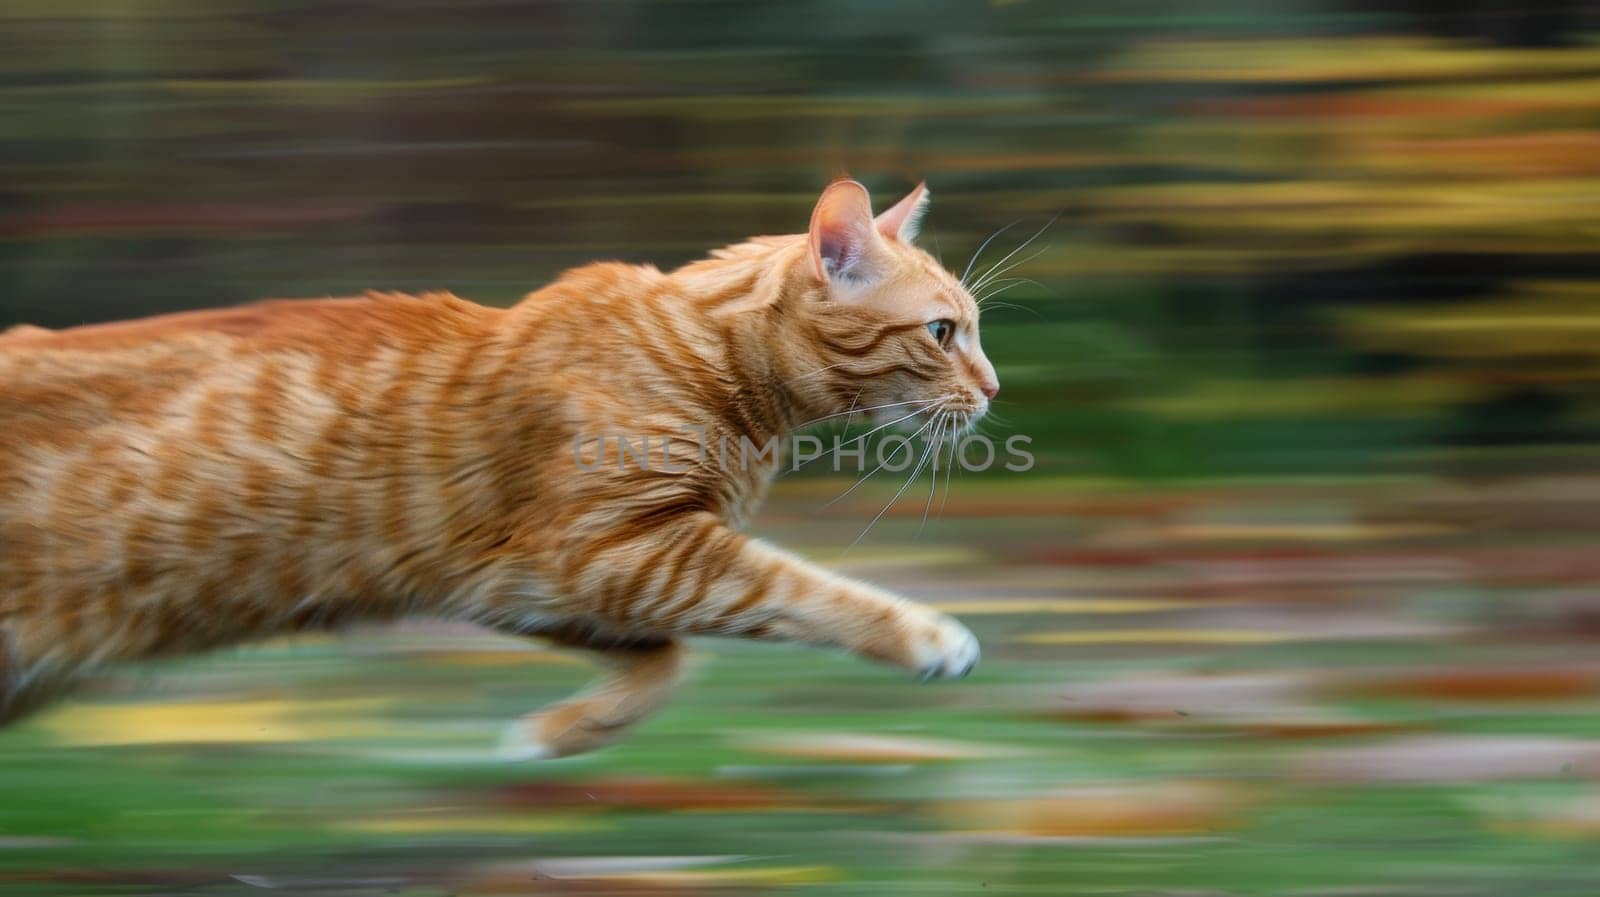 A cat running across a grassy field with blurred background